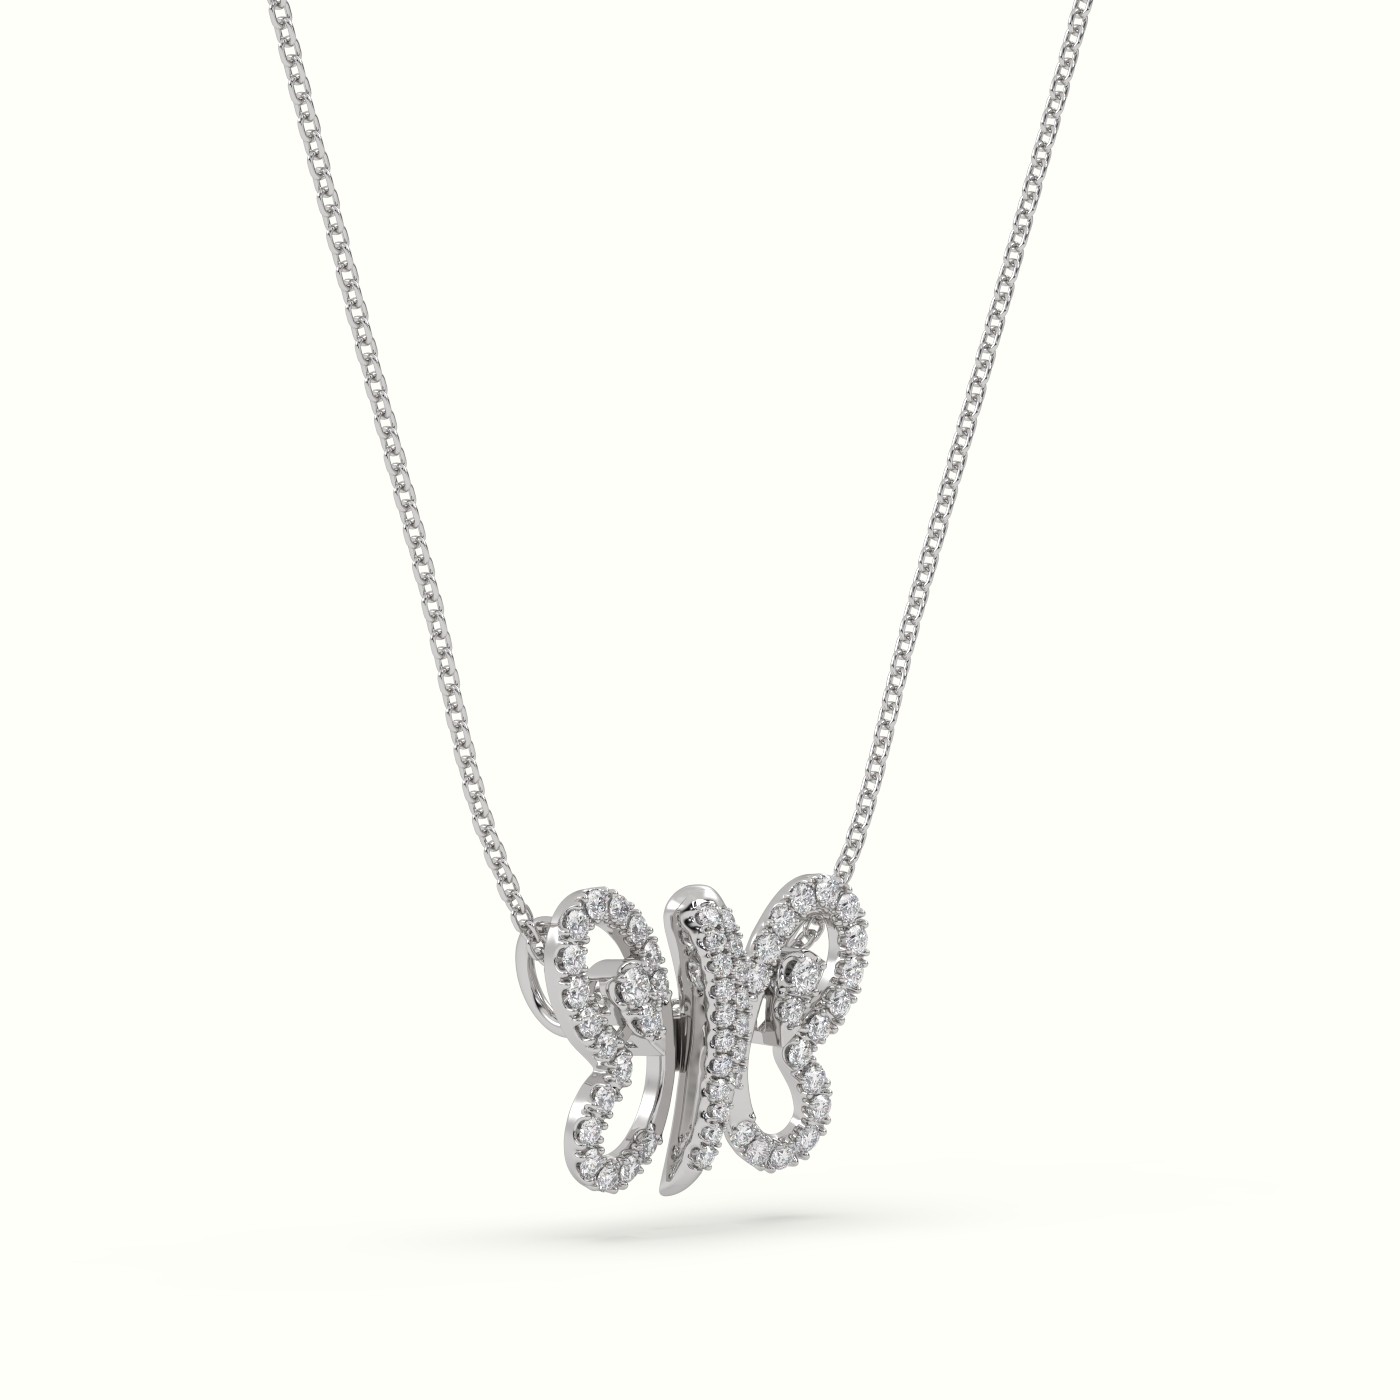 18k white gold  butterfly pendant set with total 1 carat round diamonds Photos & images